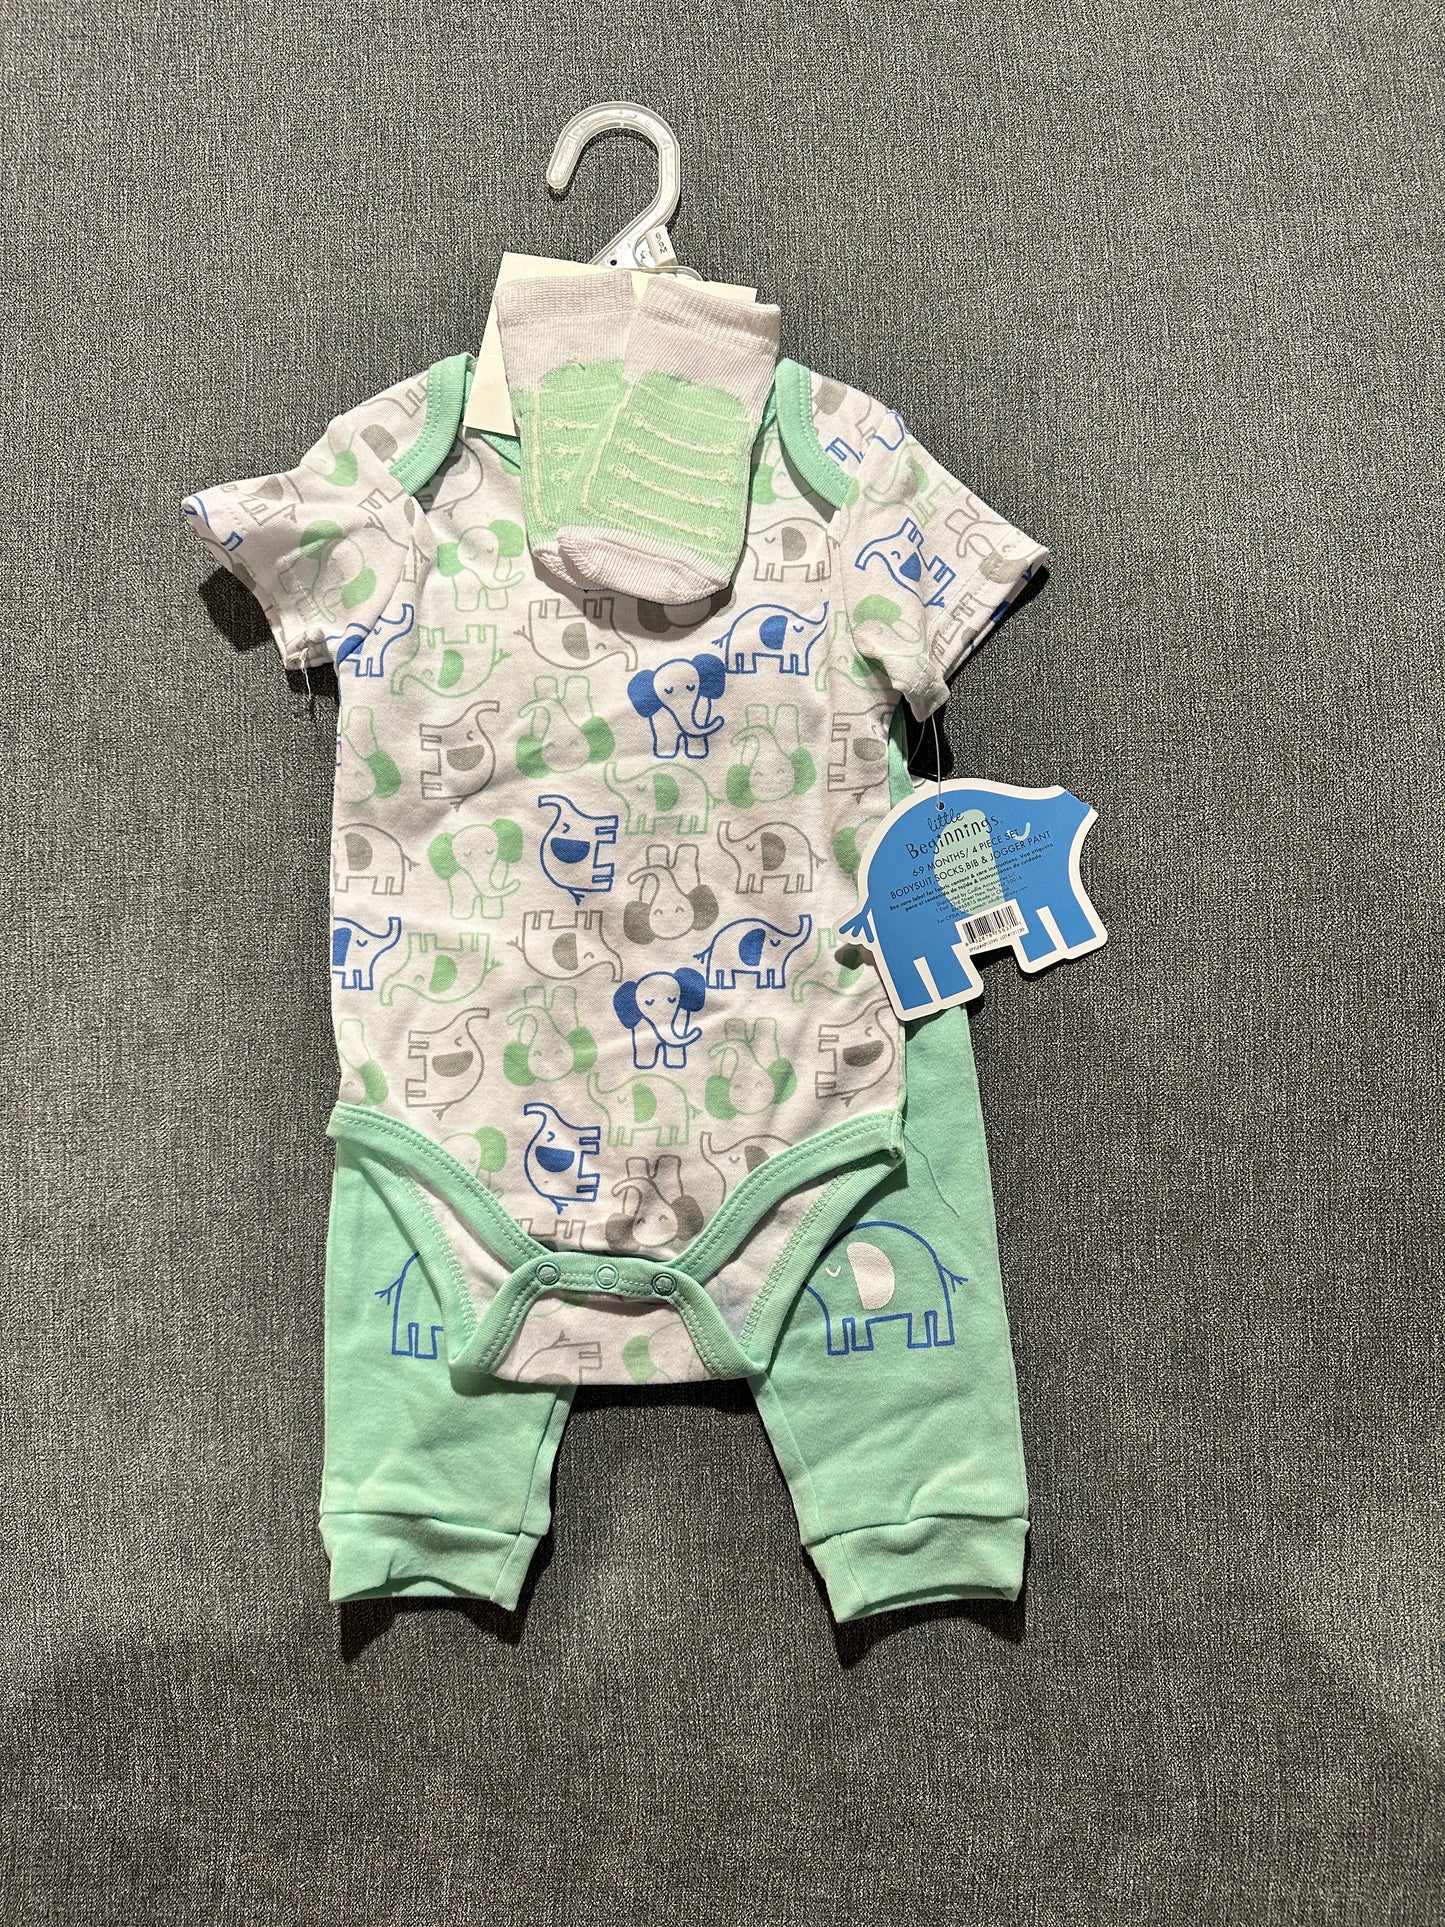 Boys NWT 6-9 month bodysuit and pant set